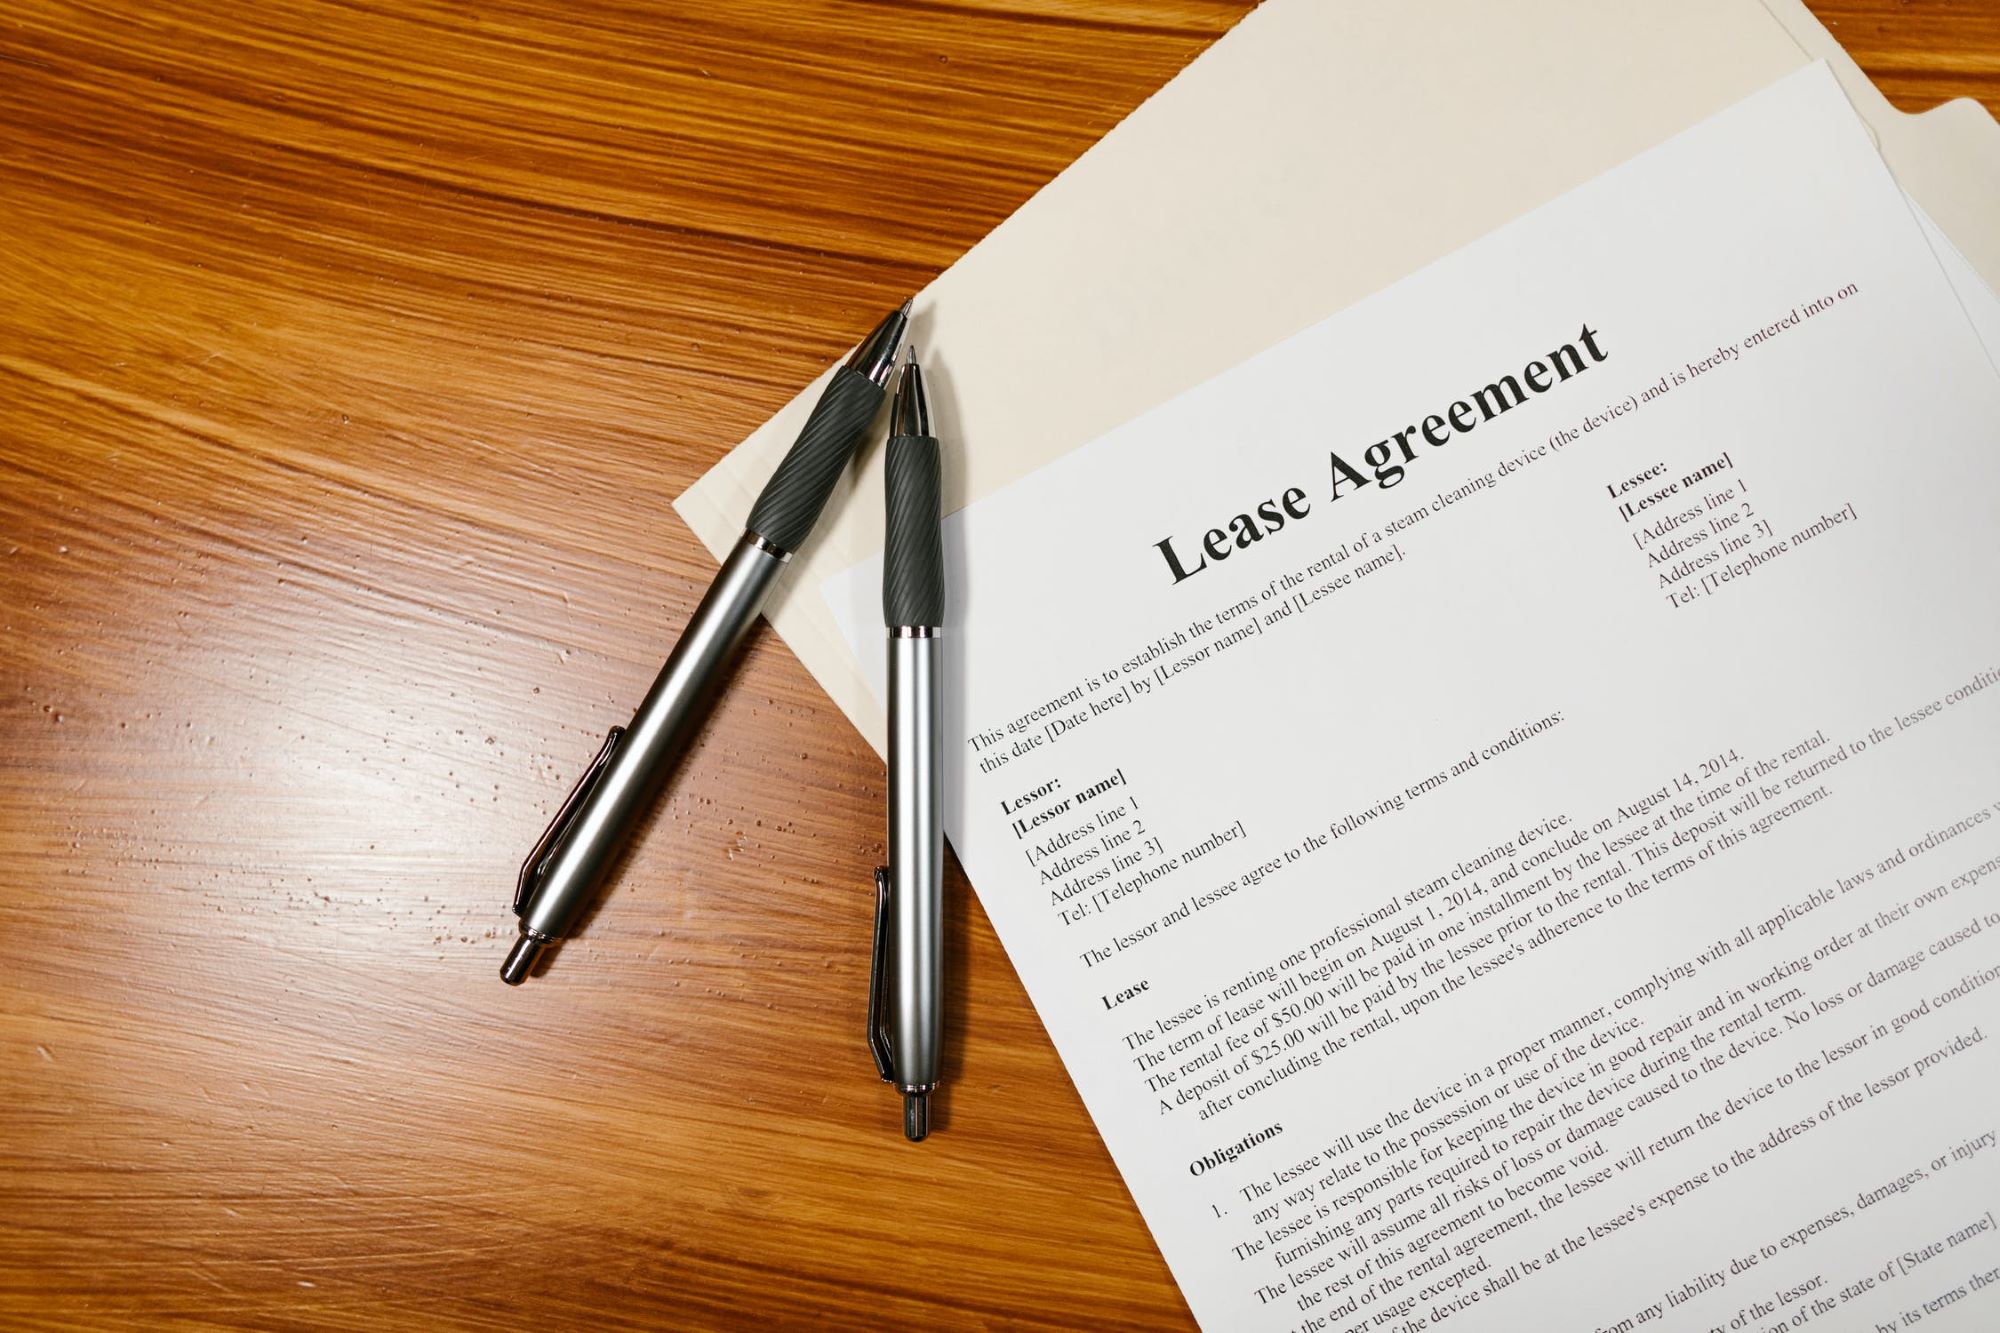 A lease agreement on a wooden table with two pens next to it